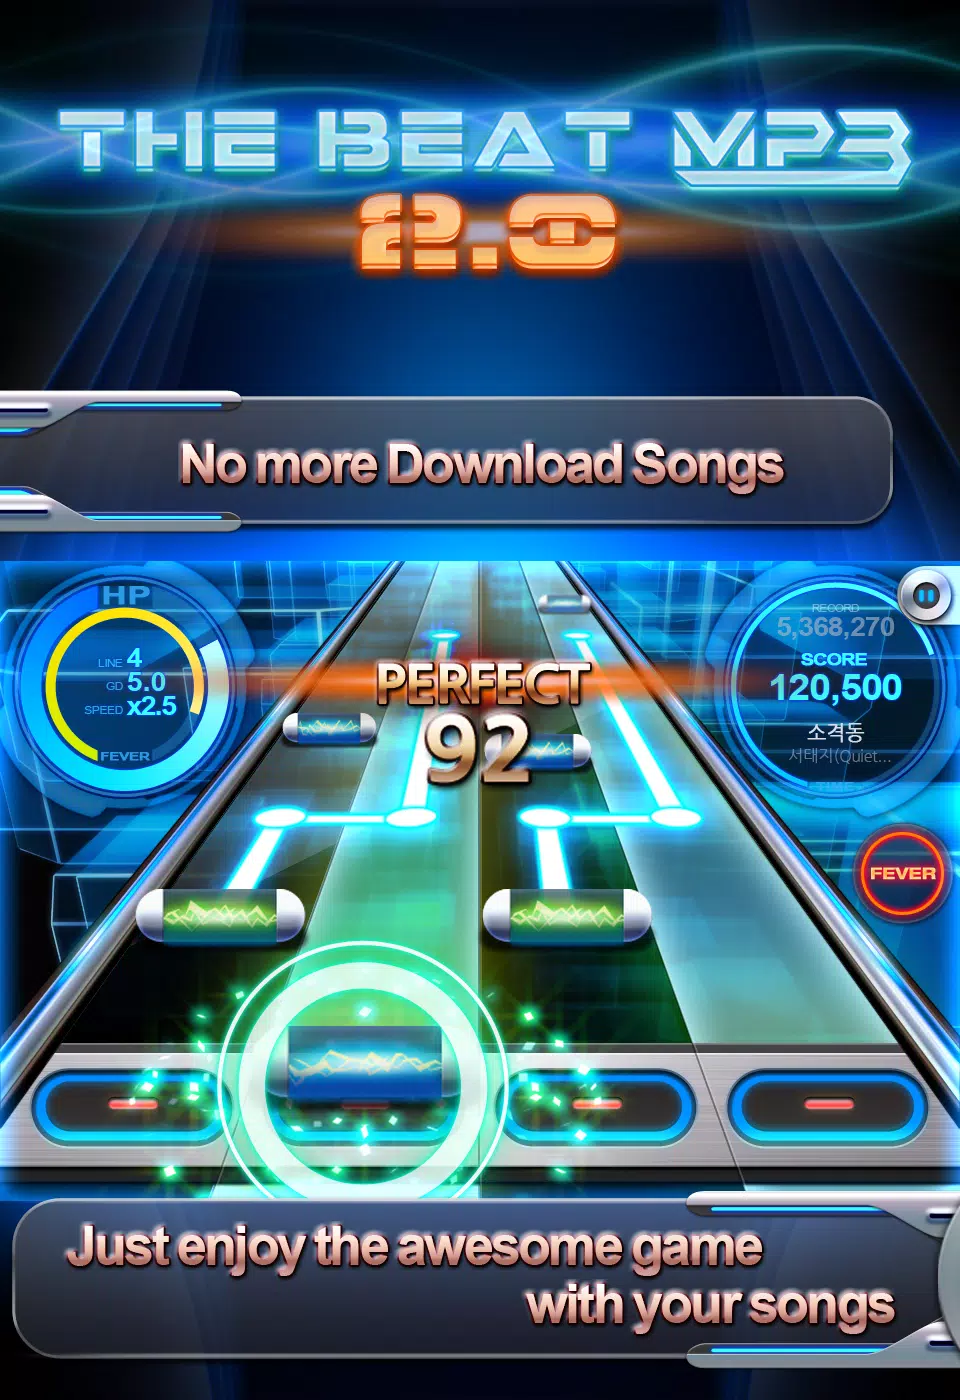 BEAT MP3 2.0 for Android - APK Download